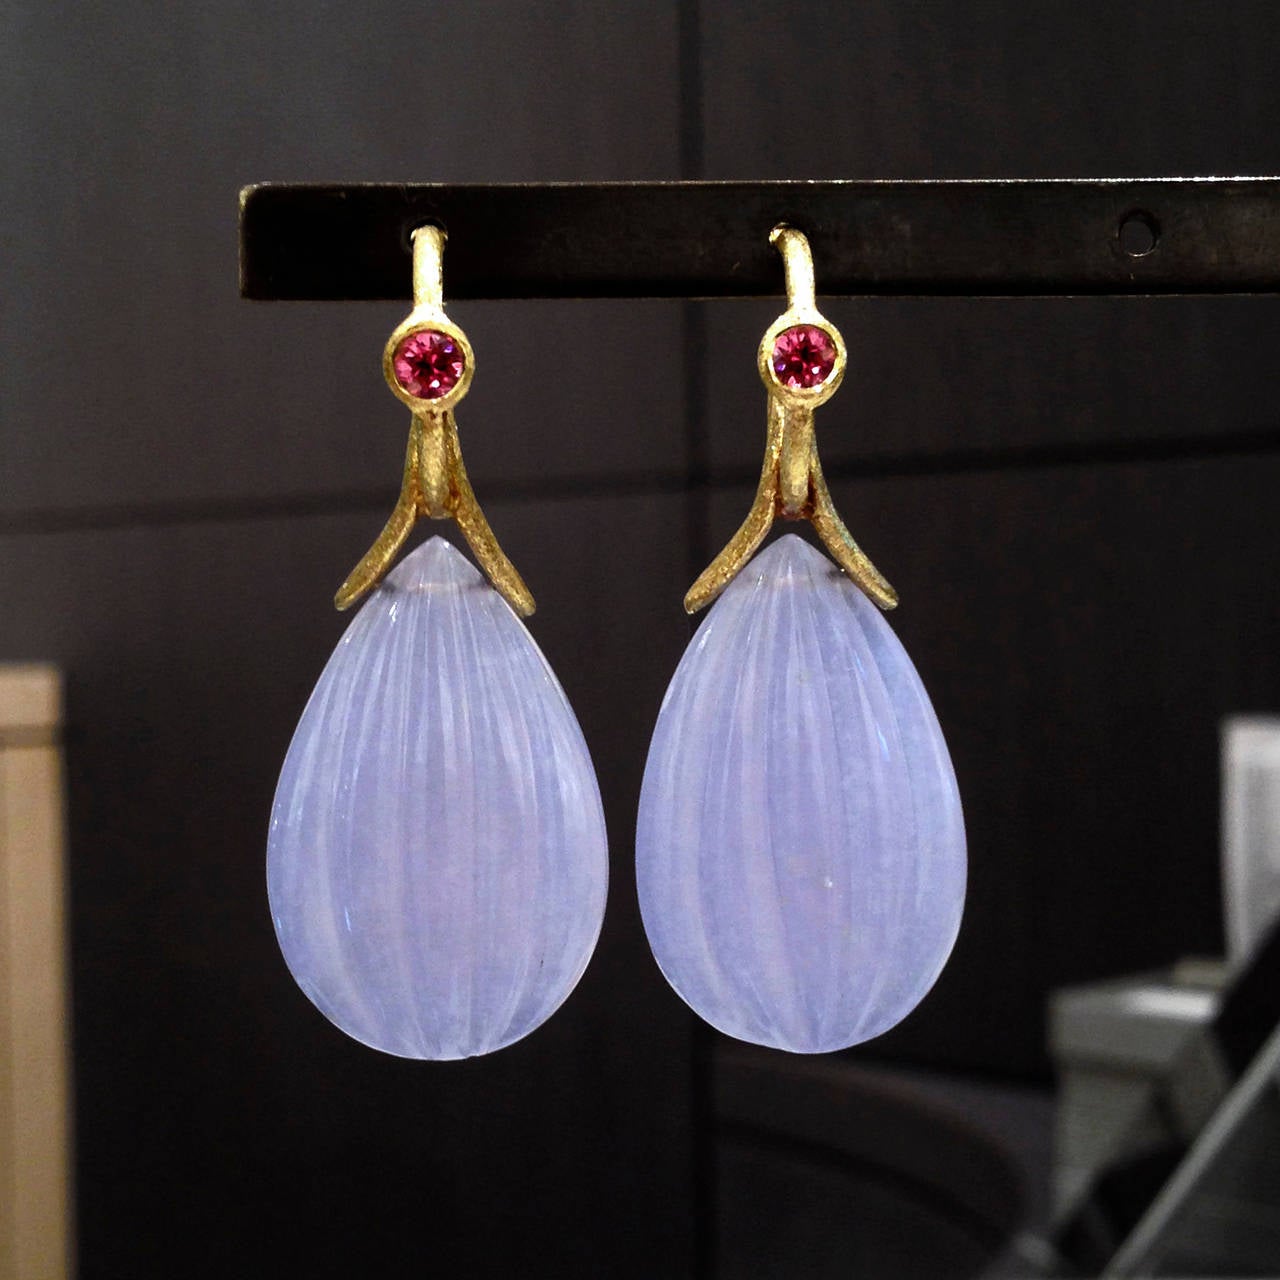 One-of-a-Kind Loop Earrings handcrafted by jewelry artist Joseph Murray in satin-finished 18k yellow gold showcasing a matched pair of hand-carved chalcedony drops and accented by two brilliant-cut pink tourmalines. Stamped and Hallmarked 18k / JM